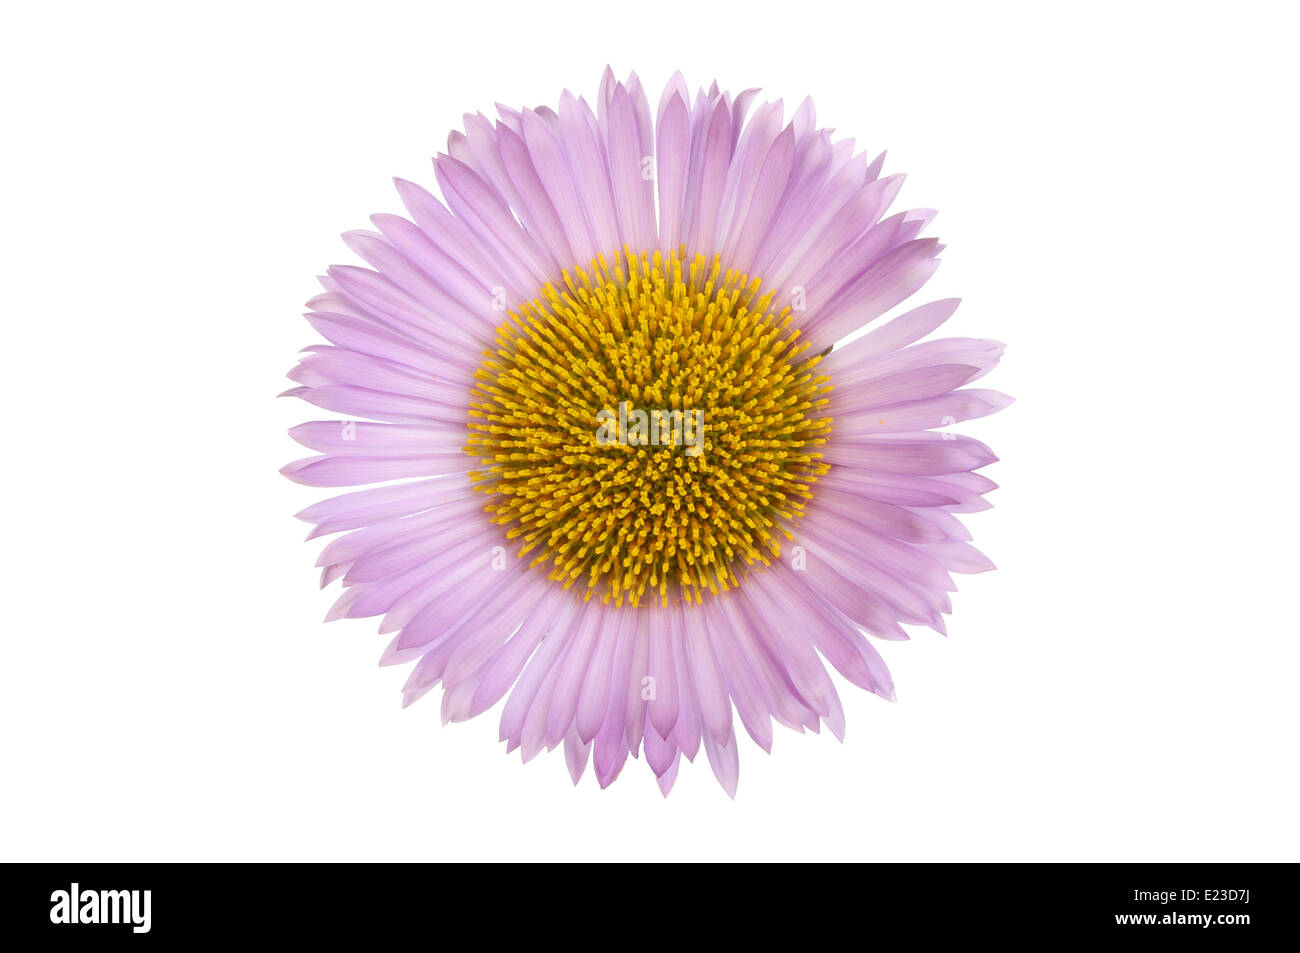 Erigeron flower with mauve petals and a yellow center isolated against white Stock Photo